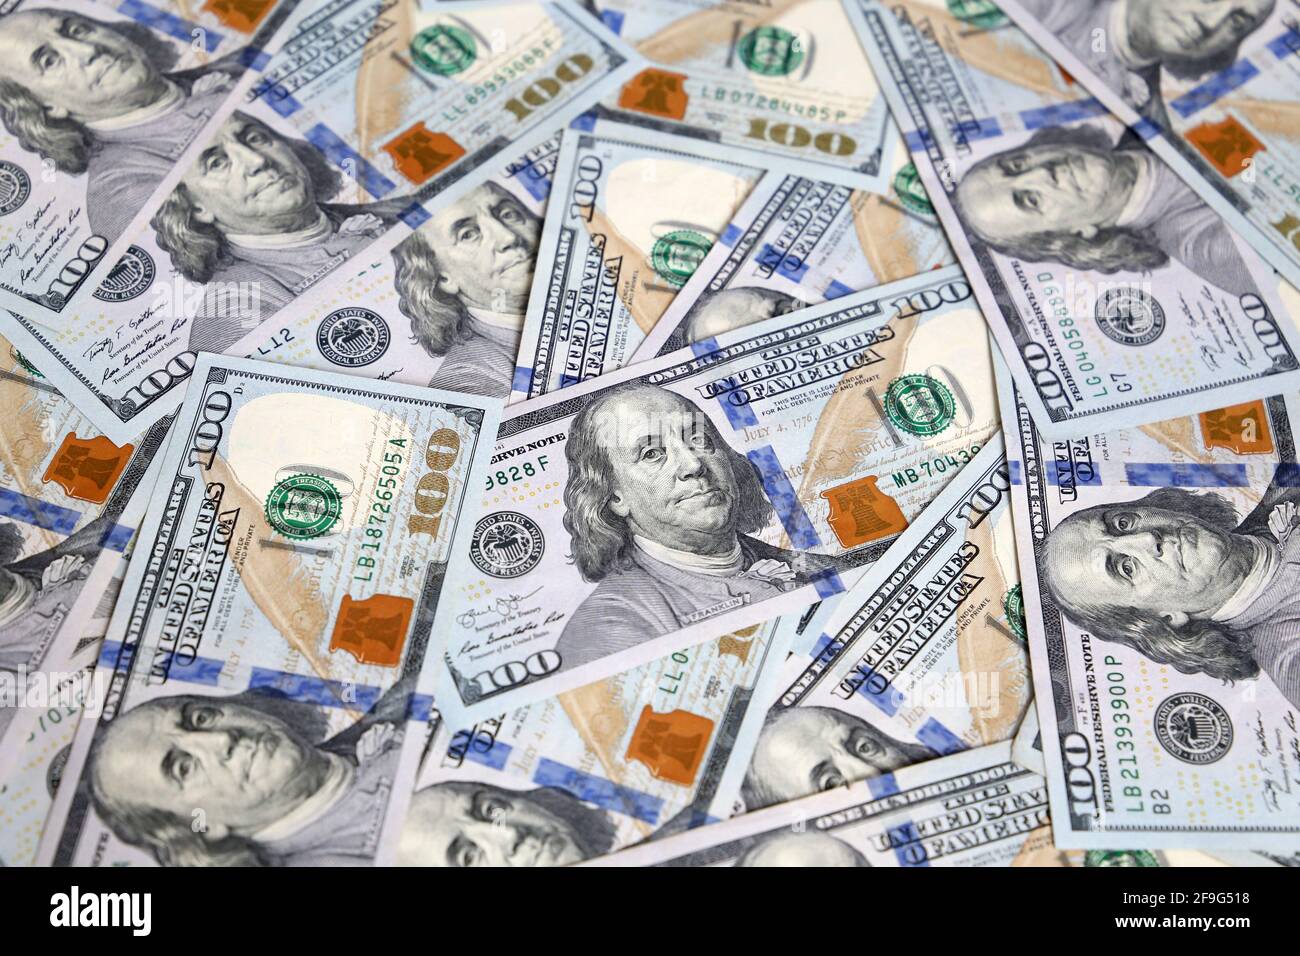 US dollars bills, paper currency for background. Concept of american and global economy, exchange rate Stock Photo